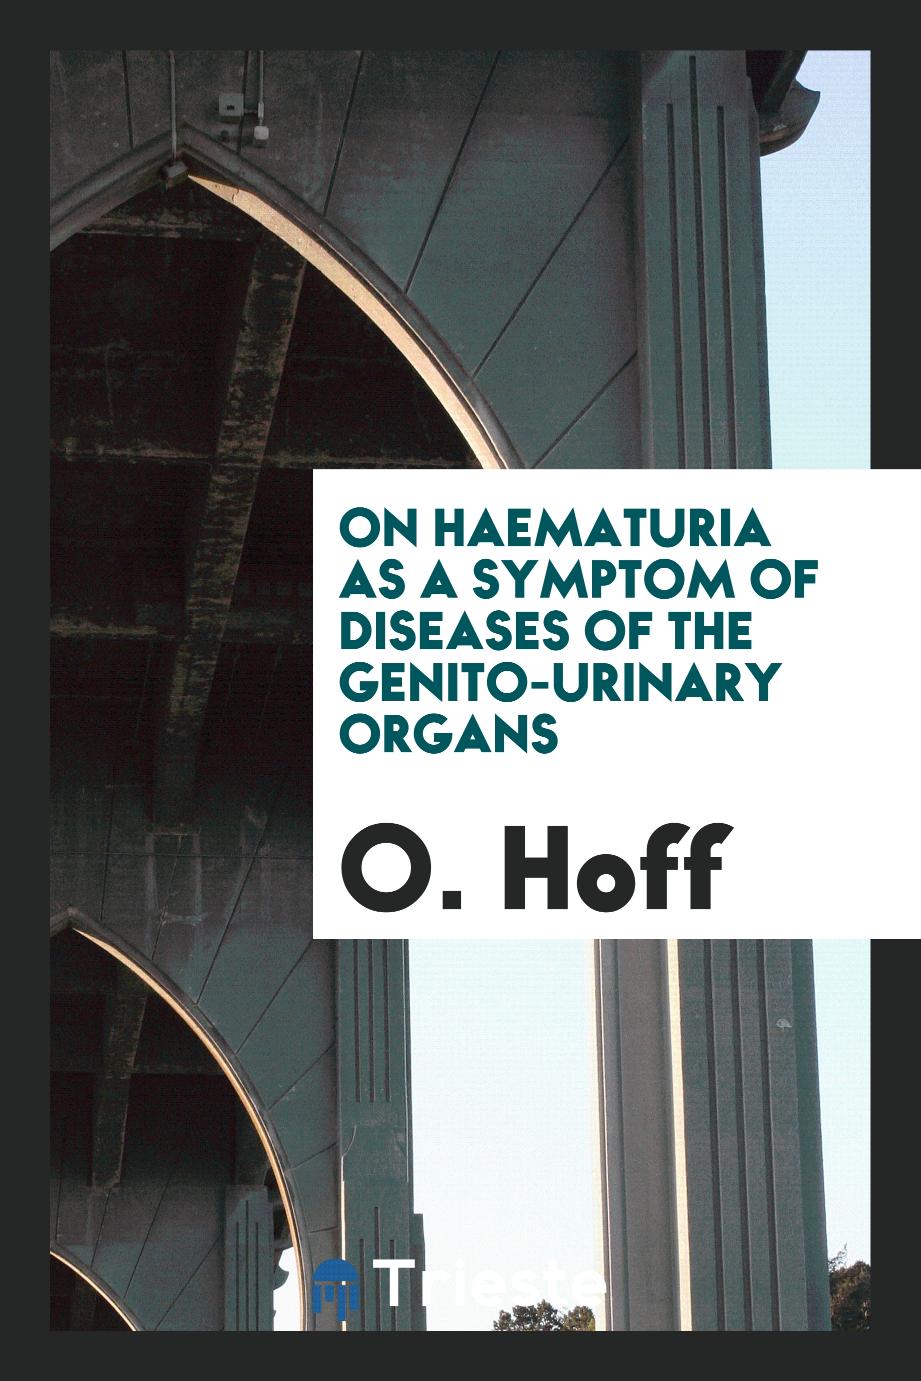 On haematuria as a symptom of diseases of the genito-urinary organs